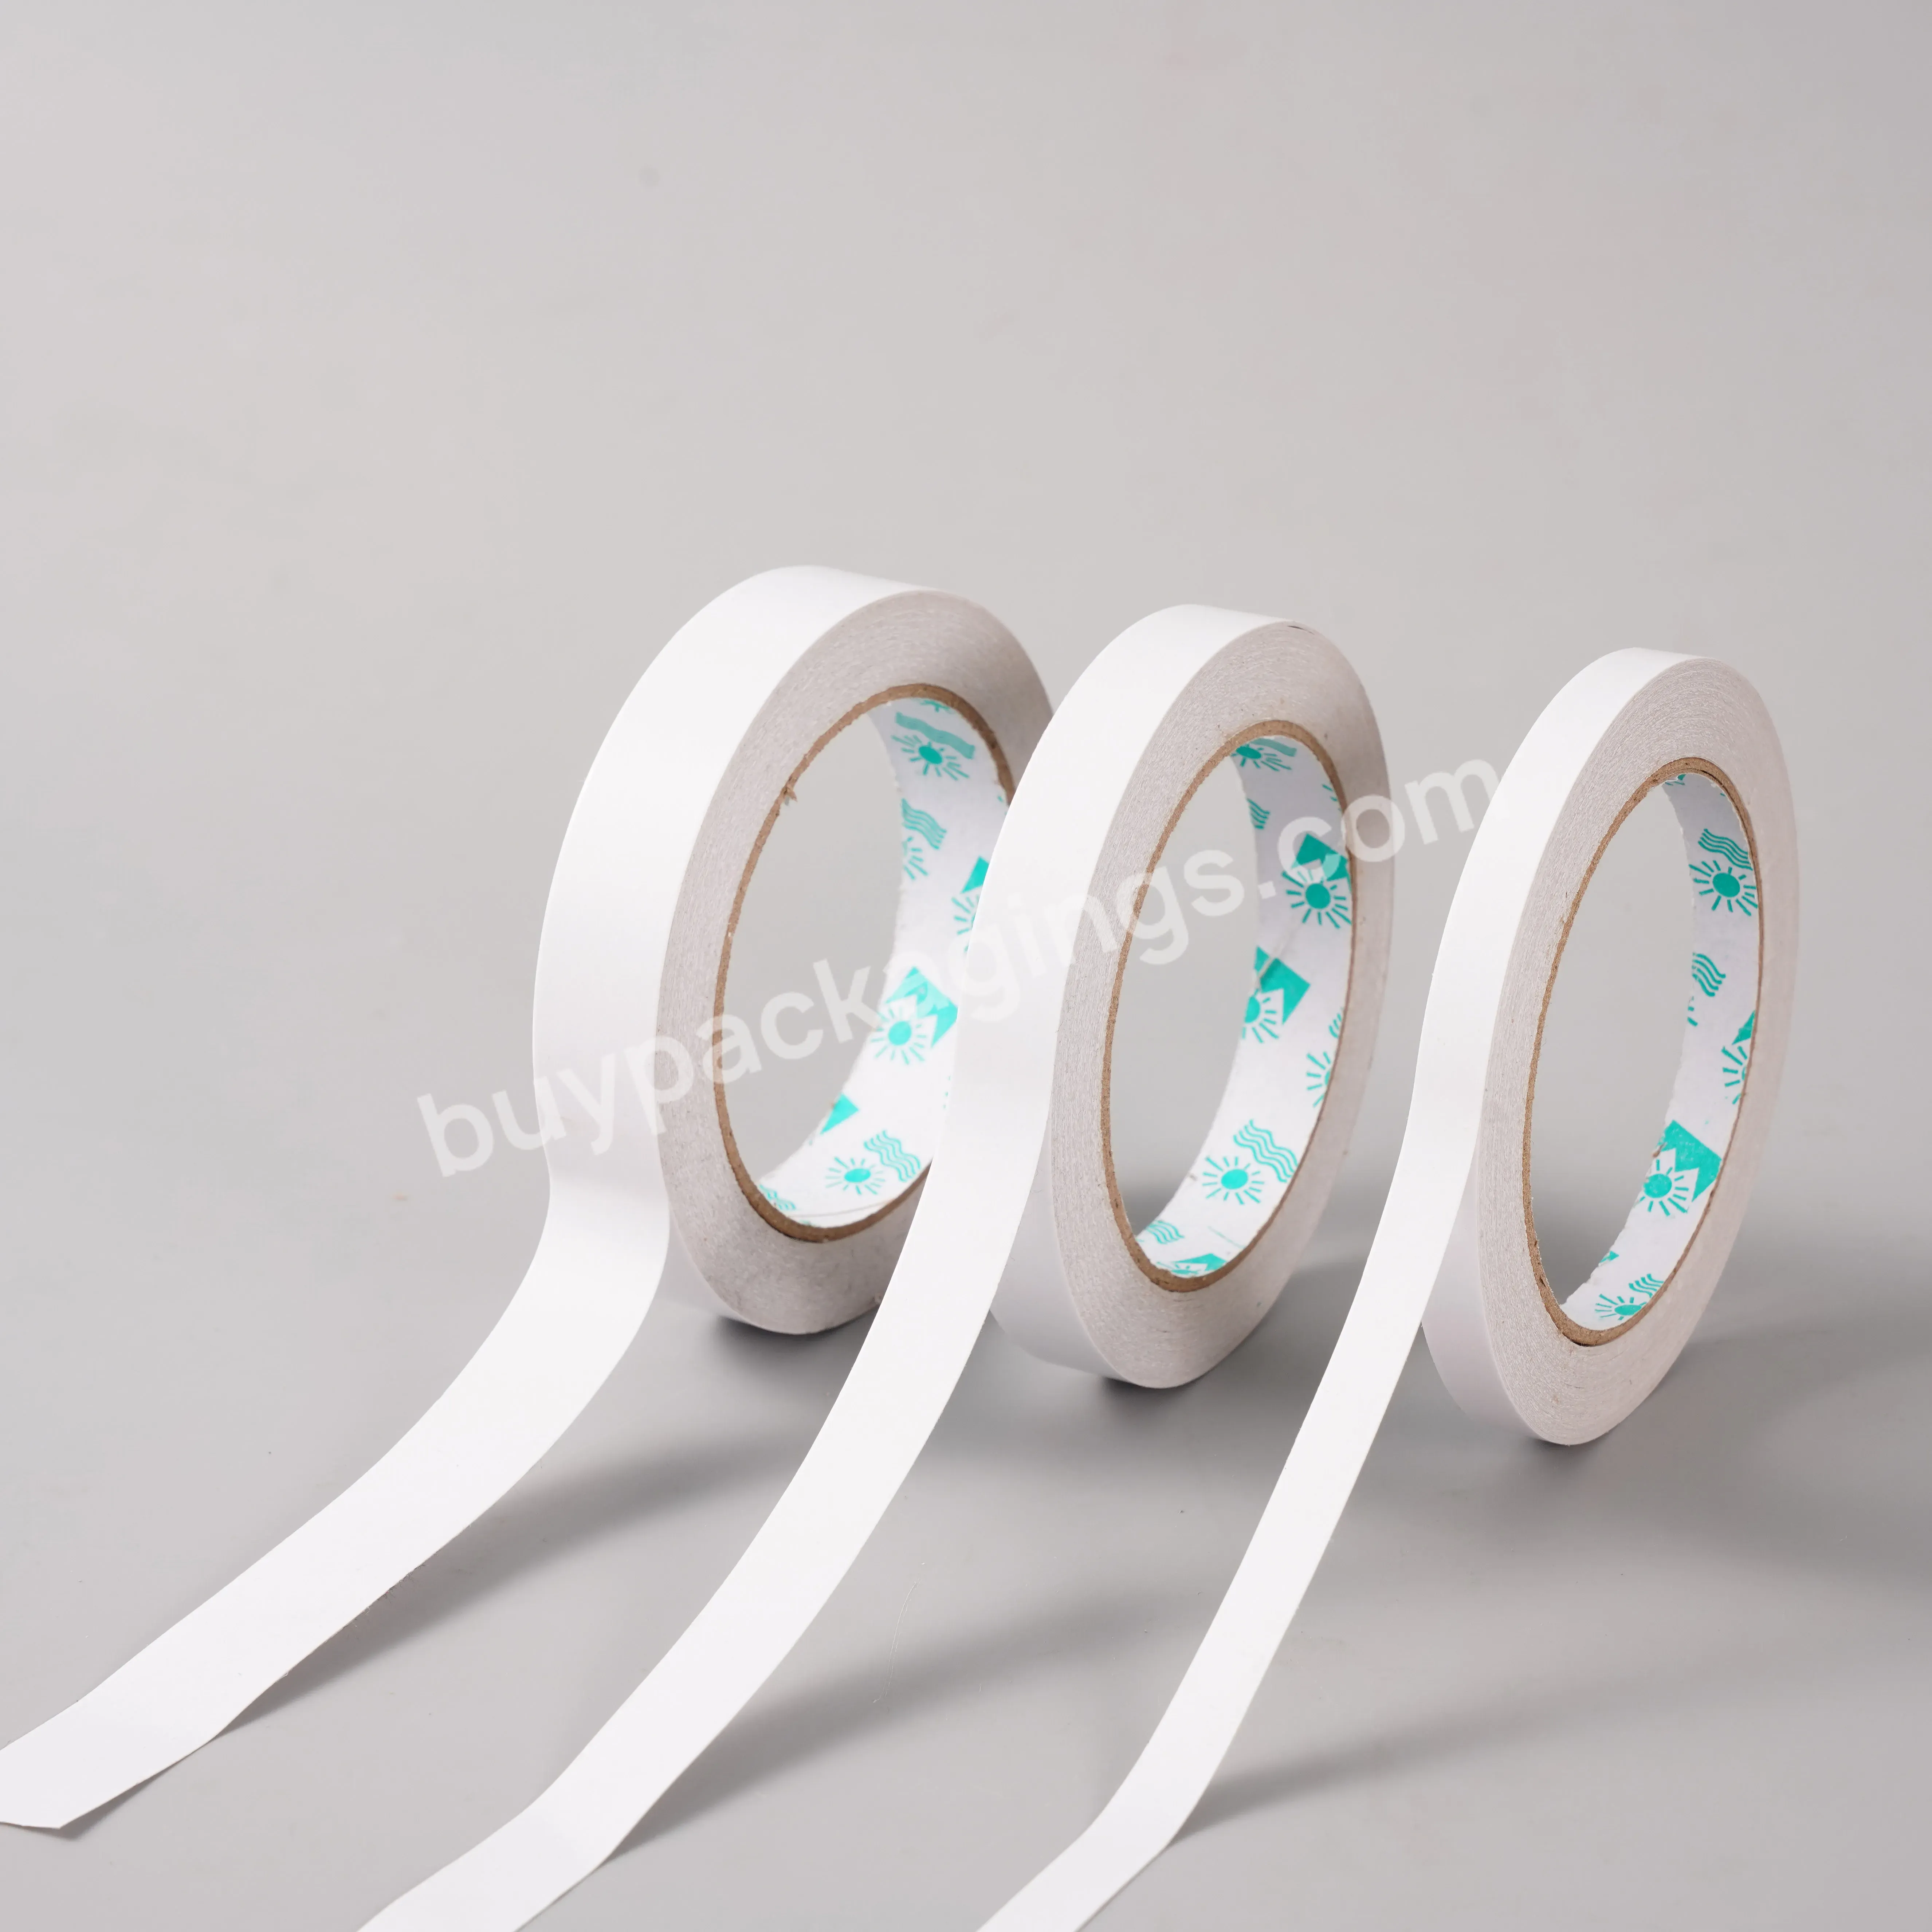 White Color High Bonding Double Sided Tape With Solvent Adhesive - Buy White Color High Bonding Double Sided Tape,Double Sided Tissue Tape,Double Sided Tape With Solvent Adhesive.